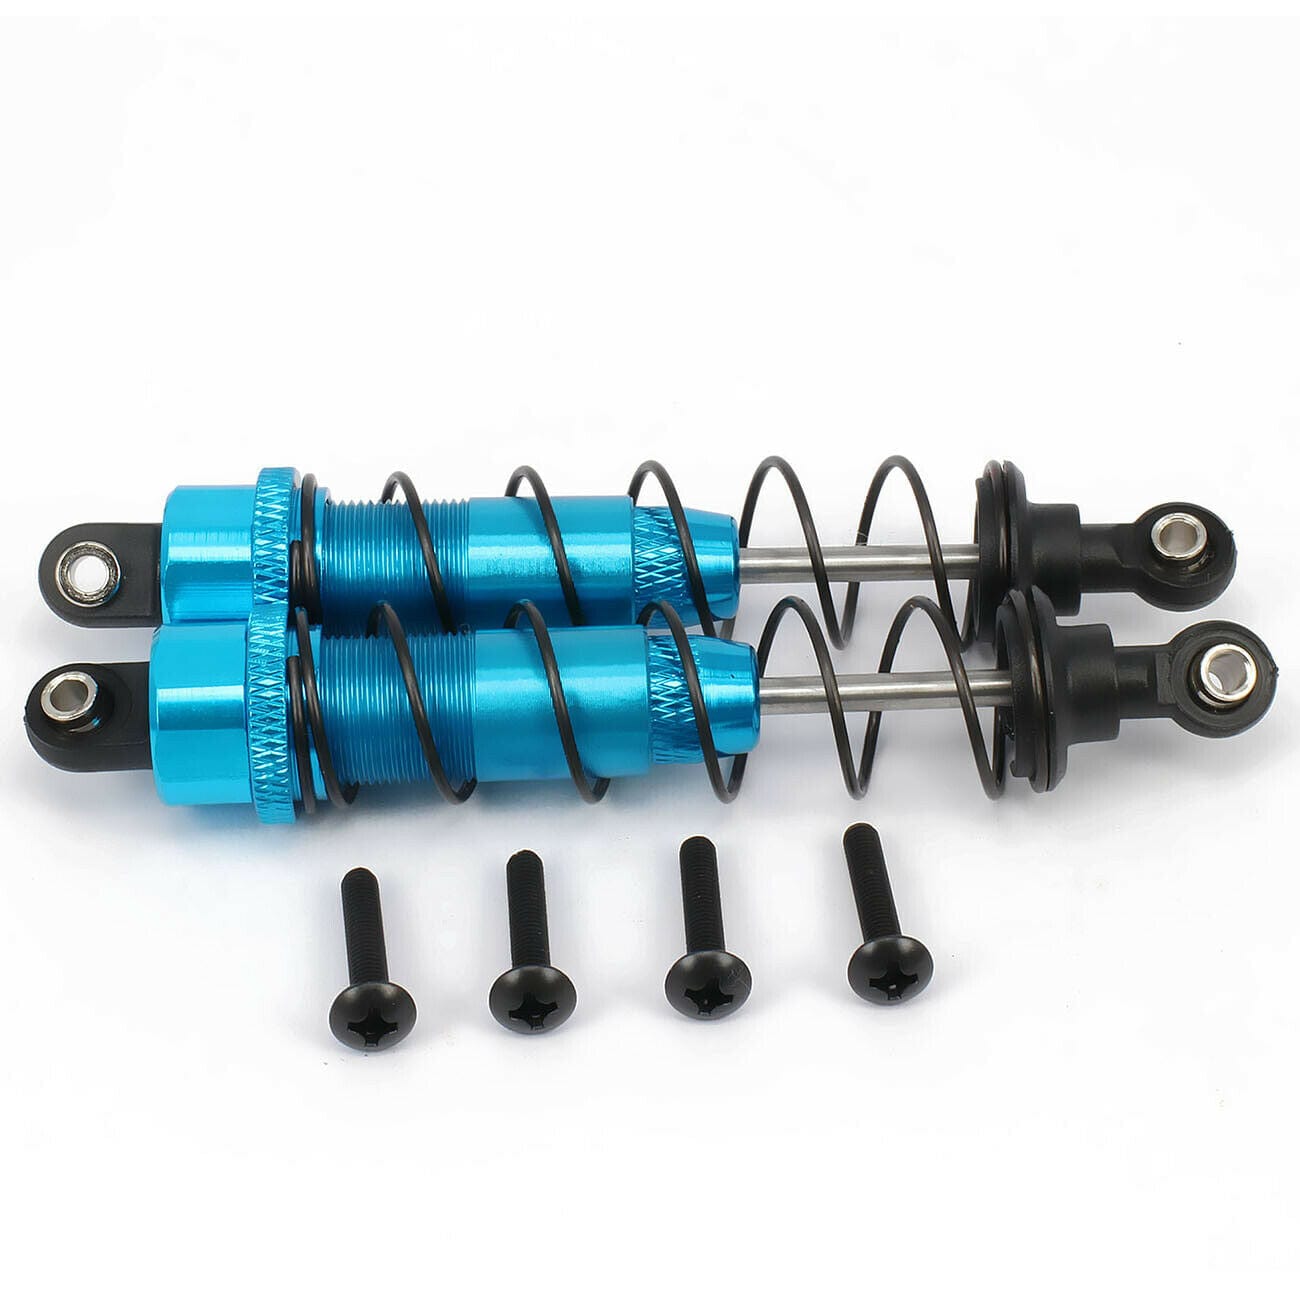 RCAWD AXIAL UPGRADE PARTS Blue 100mm RC Shock Absorber Damper For Rc Model Car 1/10 Axial Scx10